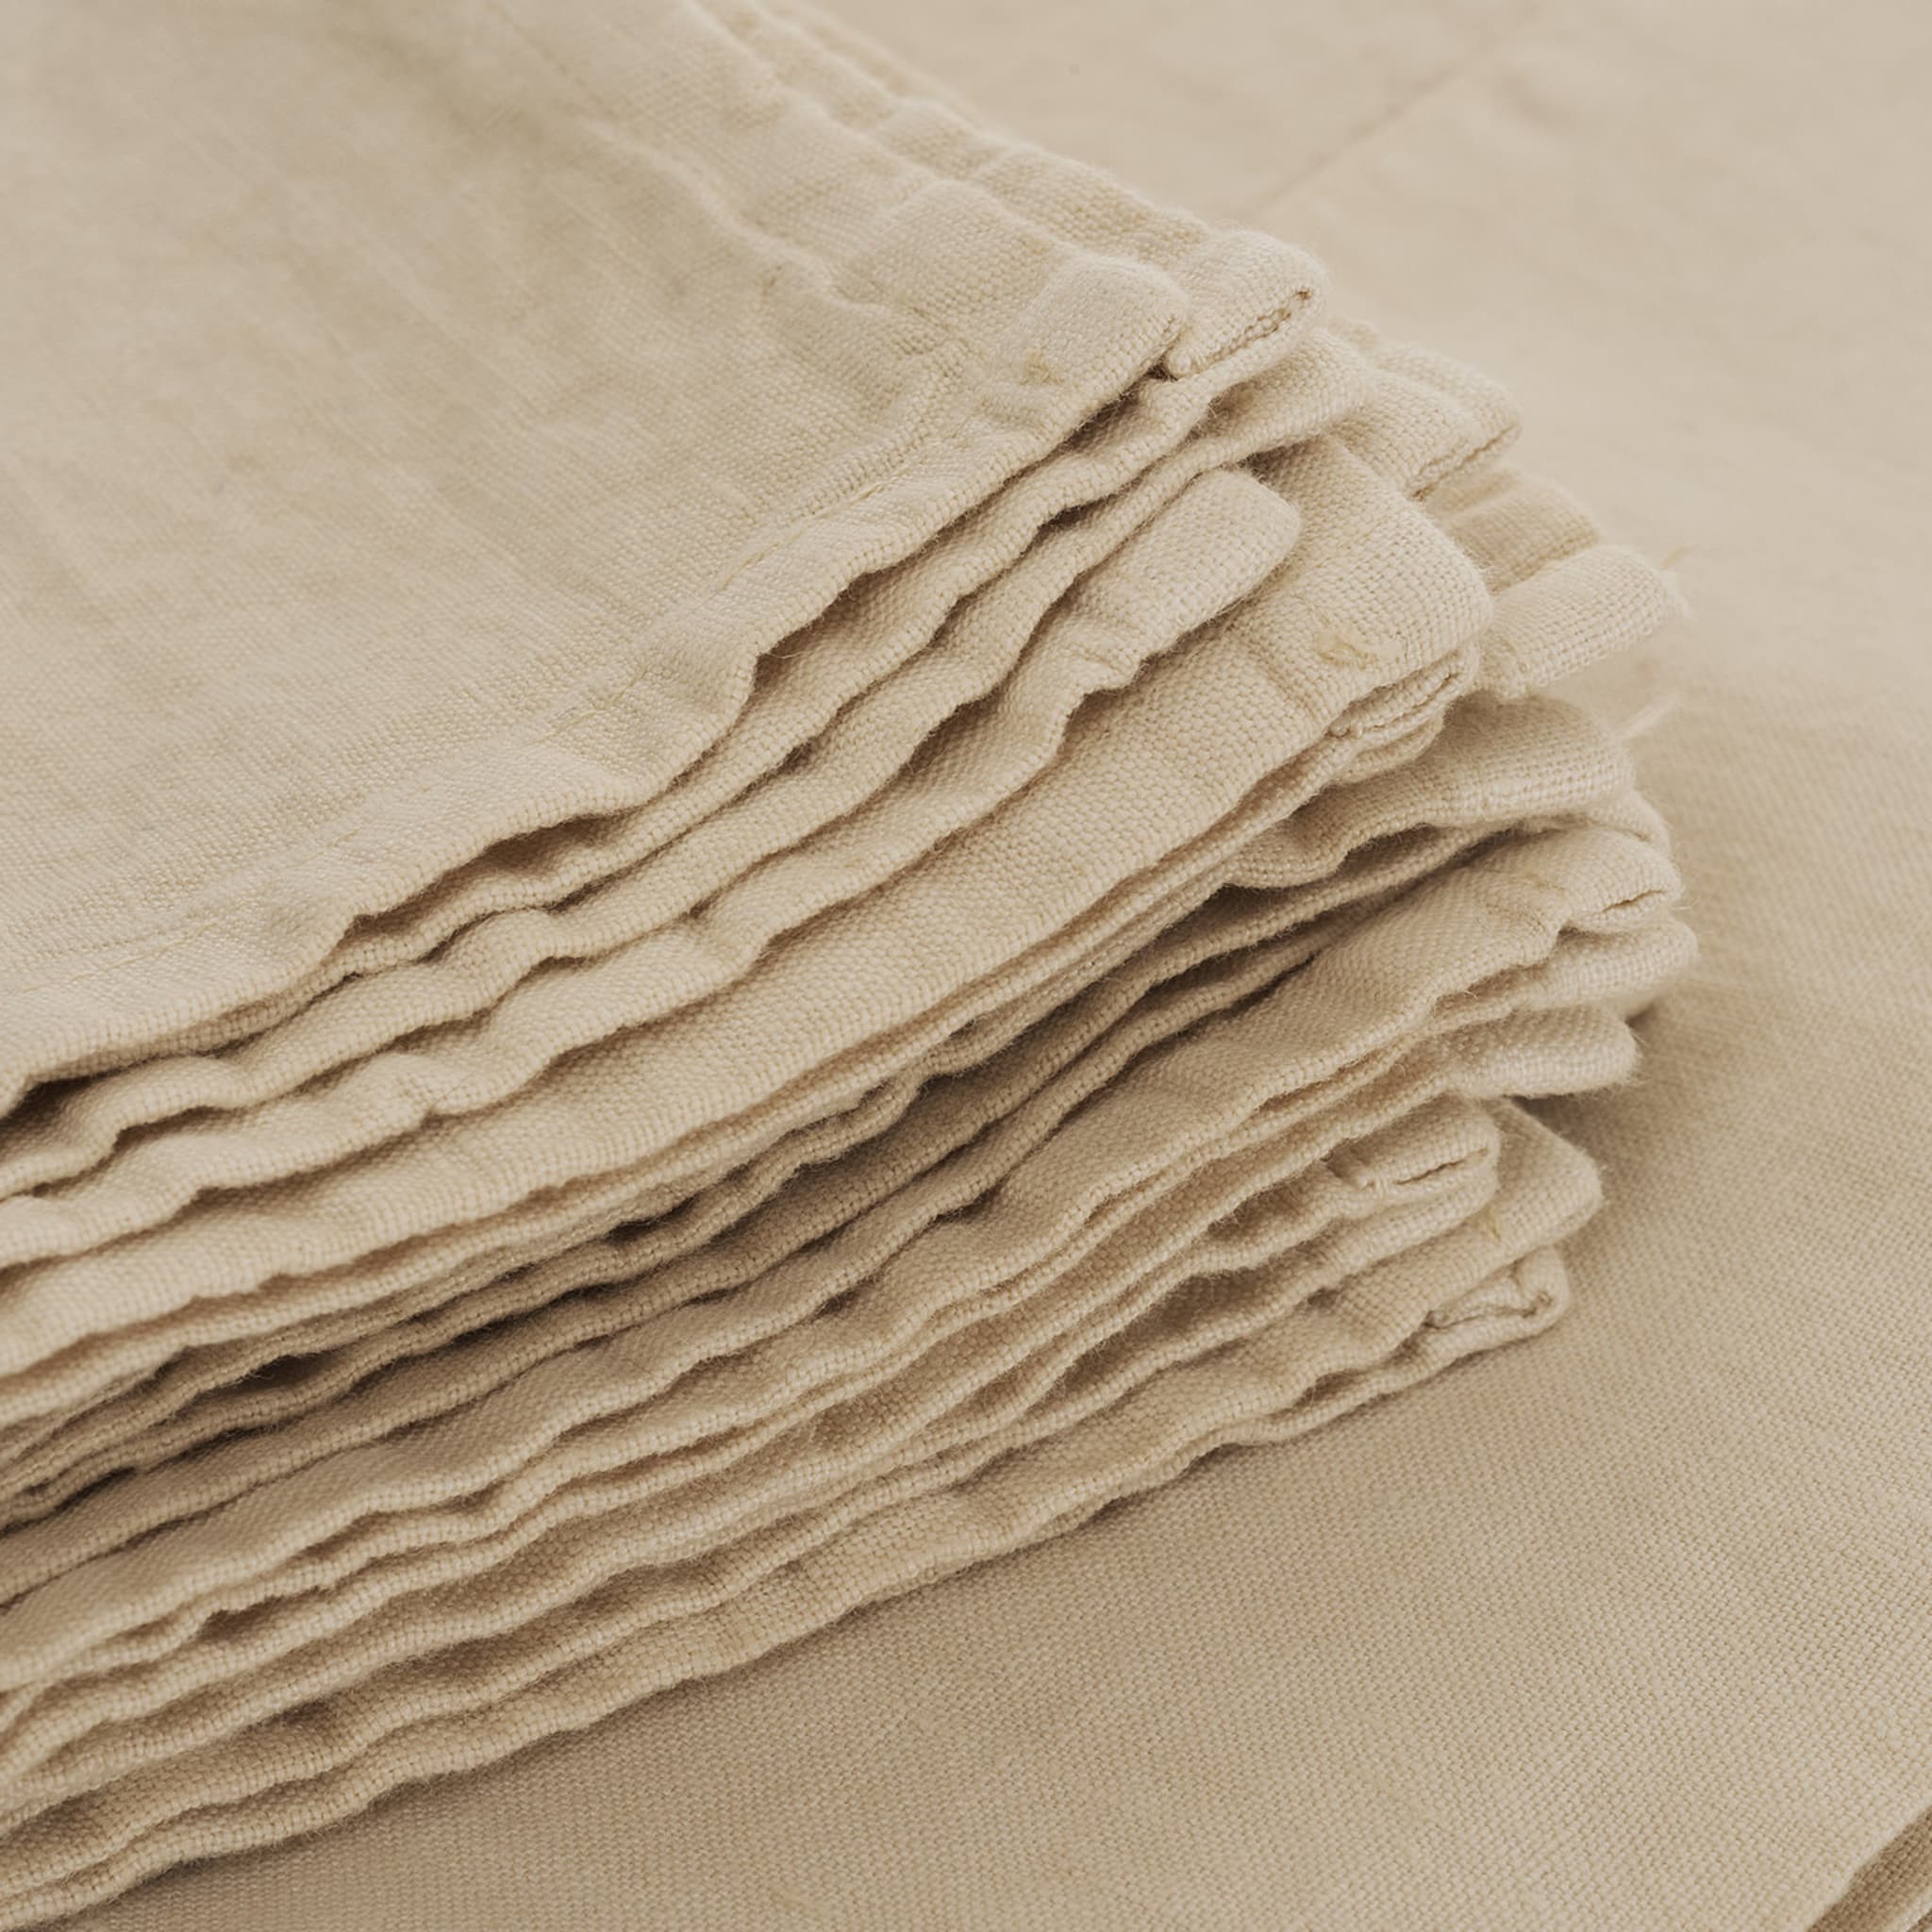 Linen Set of Tablecloth and Napkins - Alternative view 2